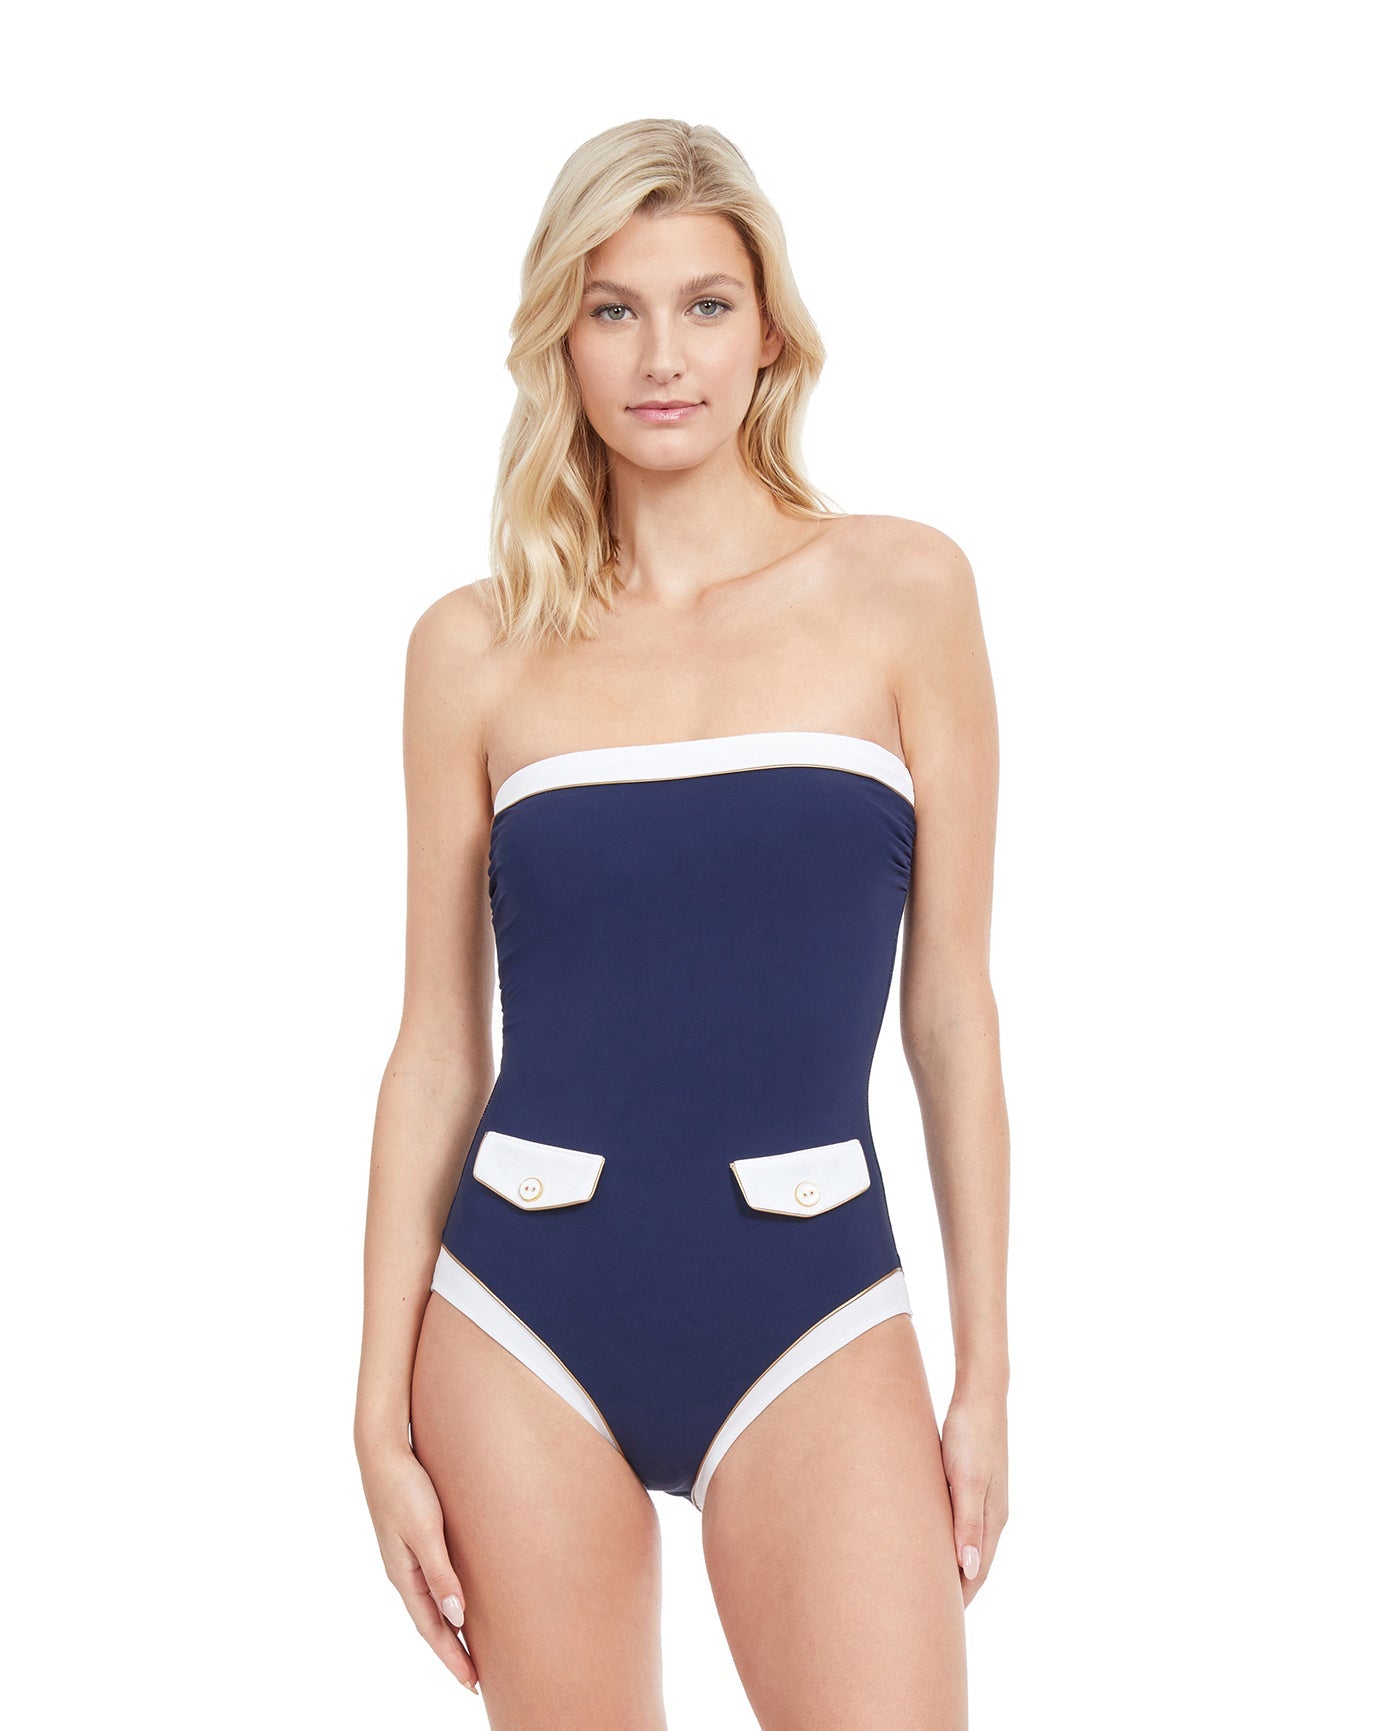 Front View Of Gottex Classic High Class Bandeau Strapless One Piece Swimsuit | Gottex High Class Navy And White